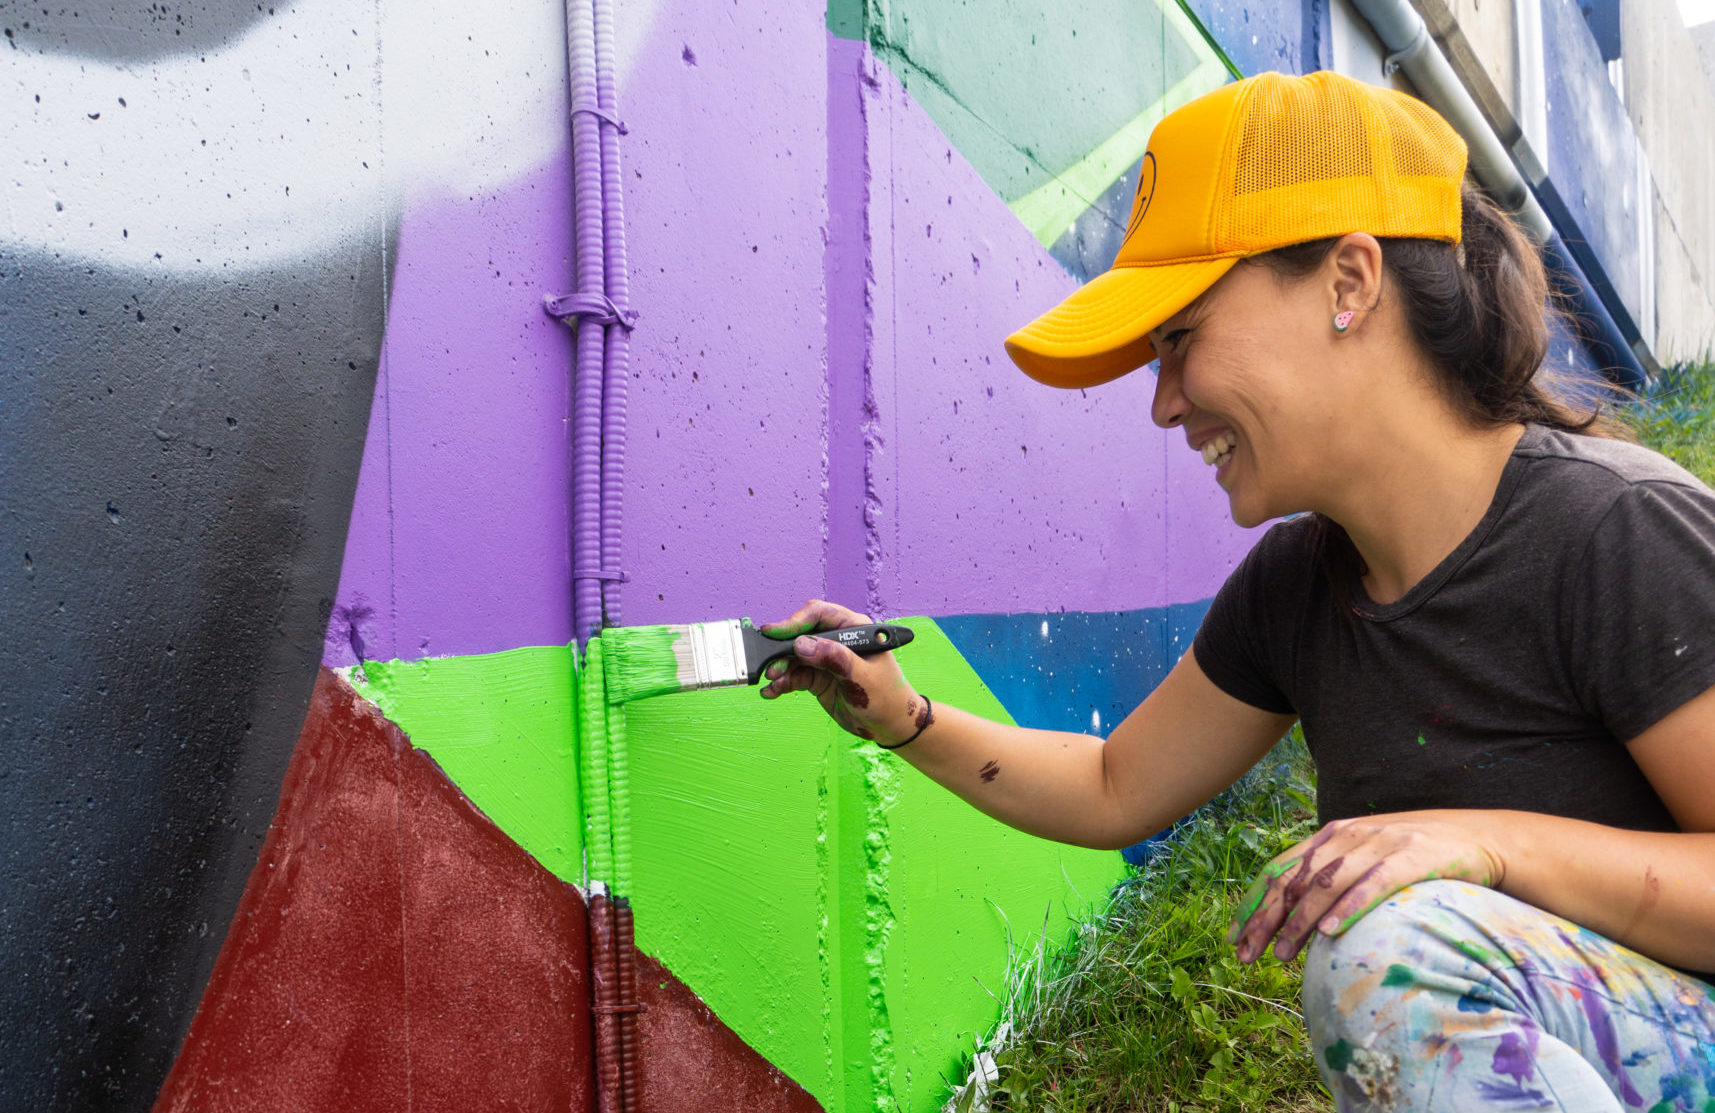 Cropped landscape photograph of art assistant Kseniya Tsoy painting the mural outside of the Wilson TTC Station entrance. She is smiling, wearing a yellow hat, grey tee and jeans. The mural has geometric shapes in colours of purple, green, blue and red.